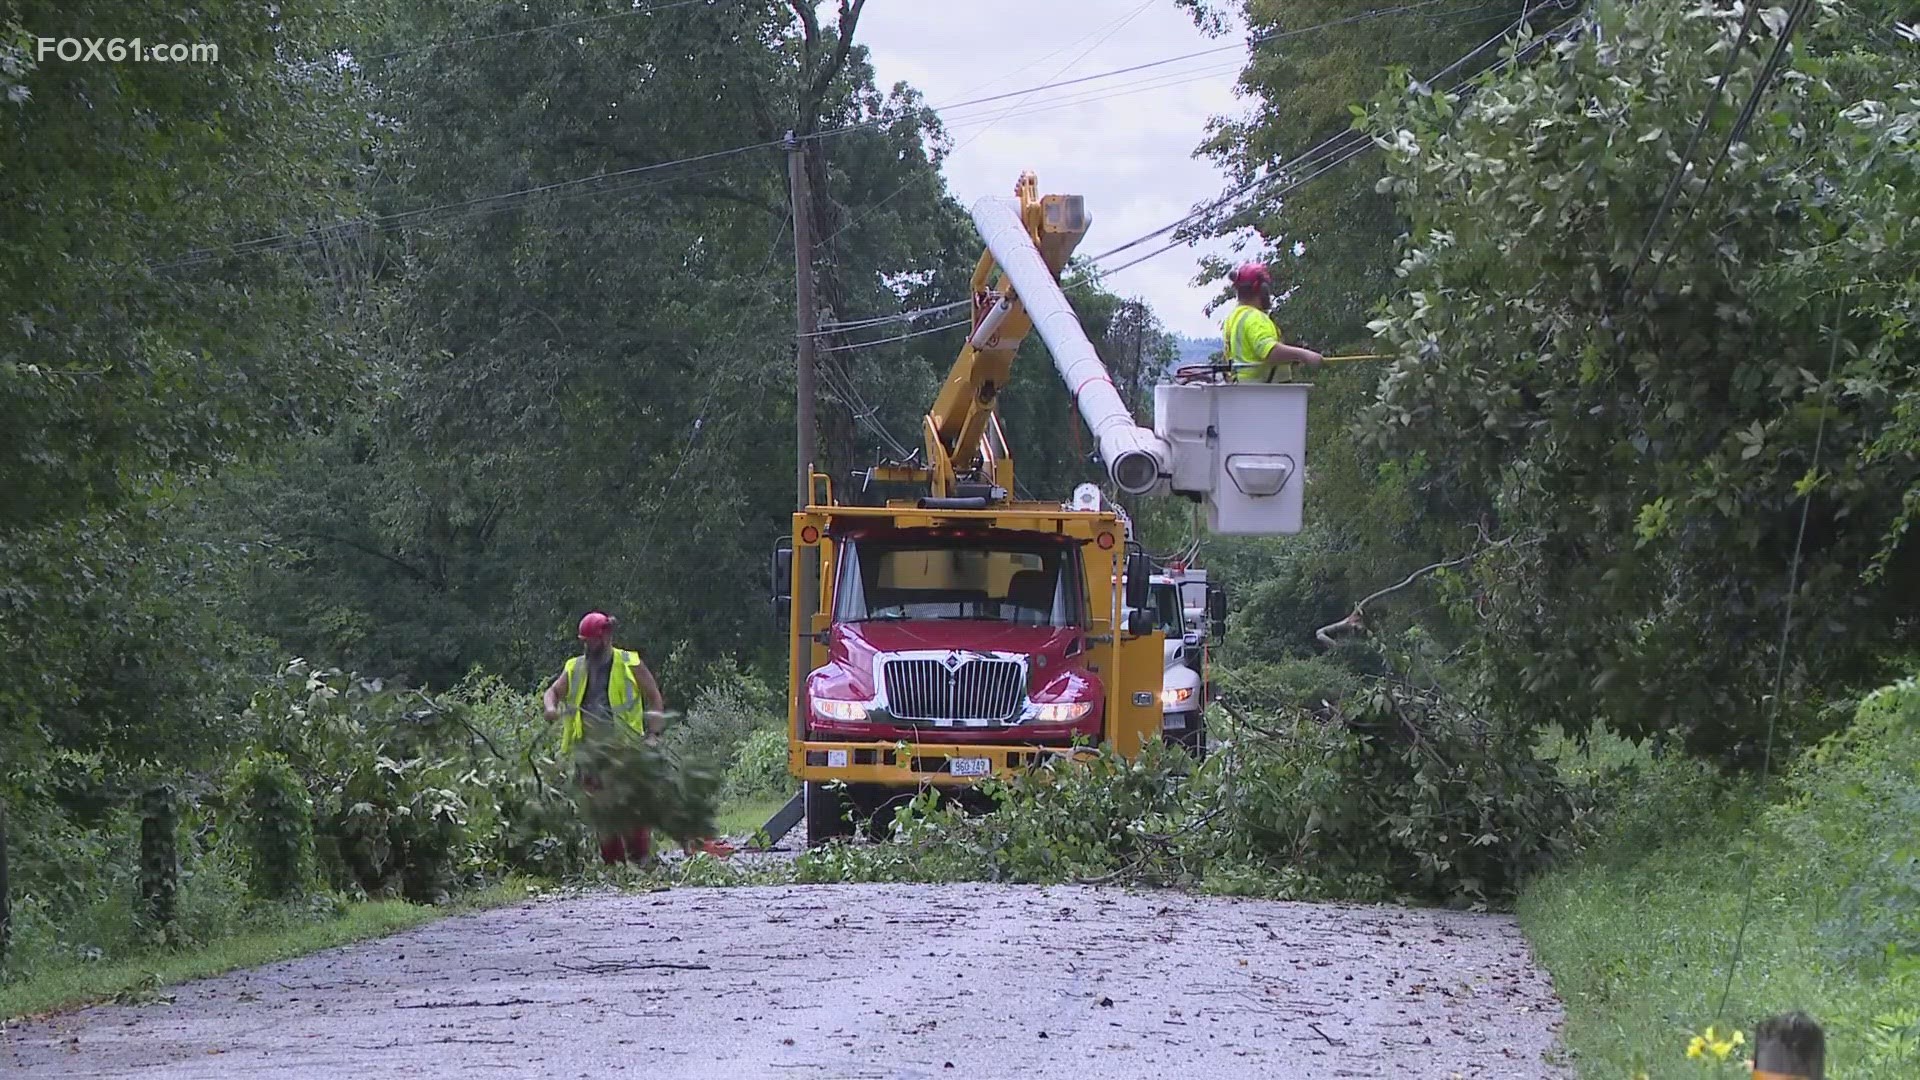 More than 300 Eversource customers were in the dark midday as crews worked to restore power after trees brought down power lines across Scotland, Windham.